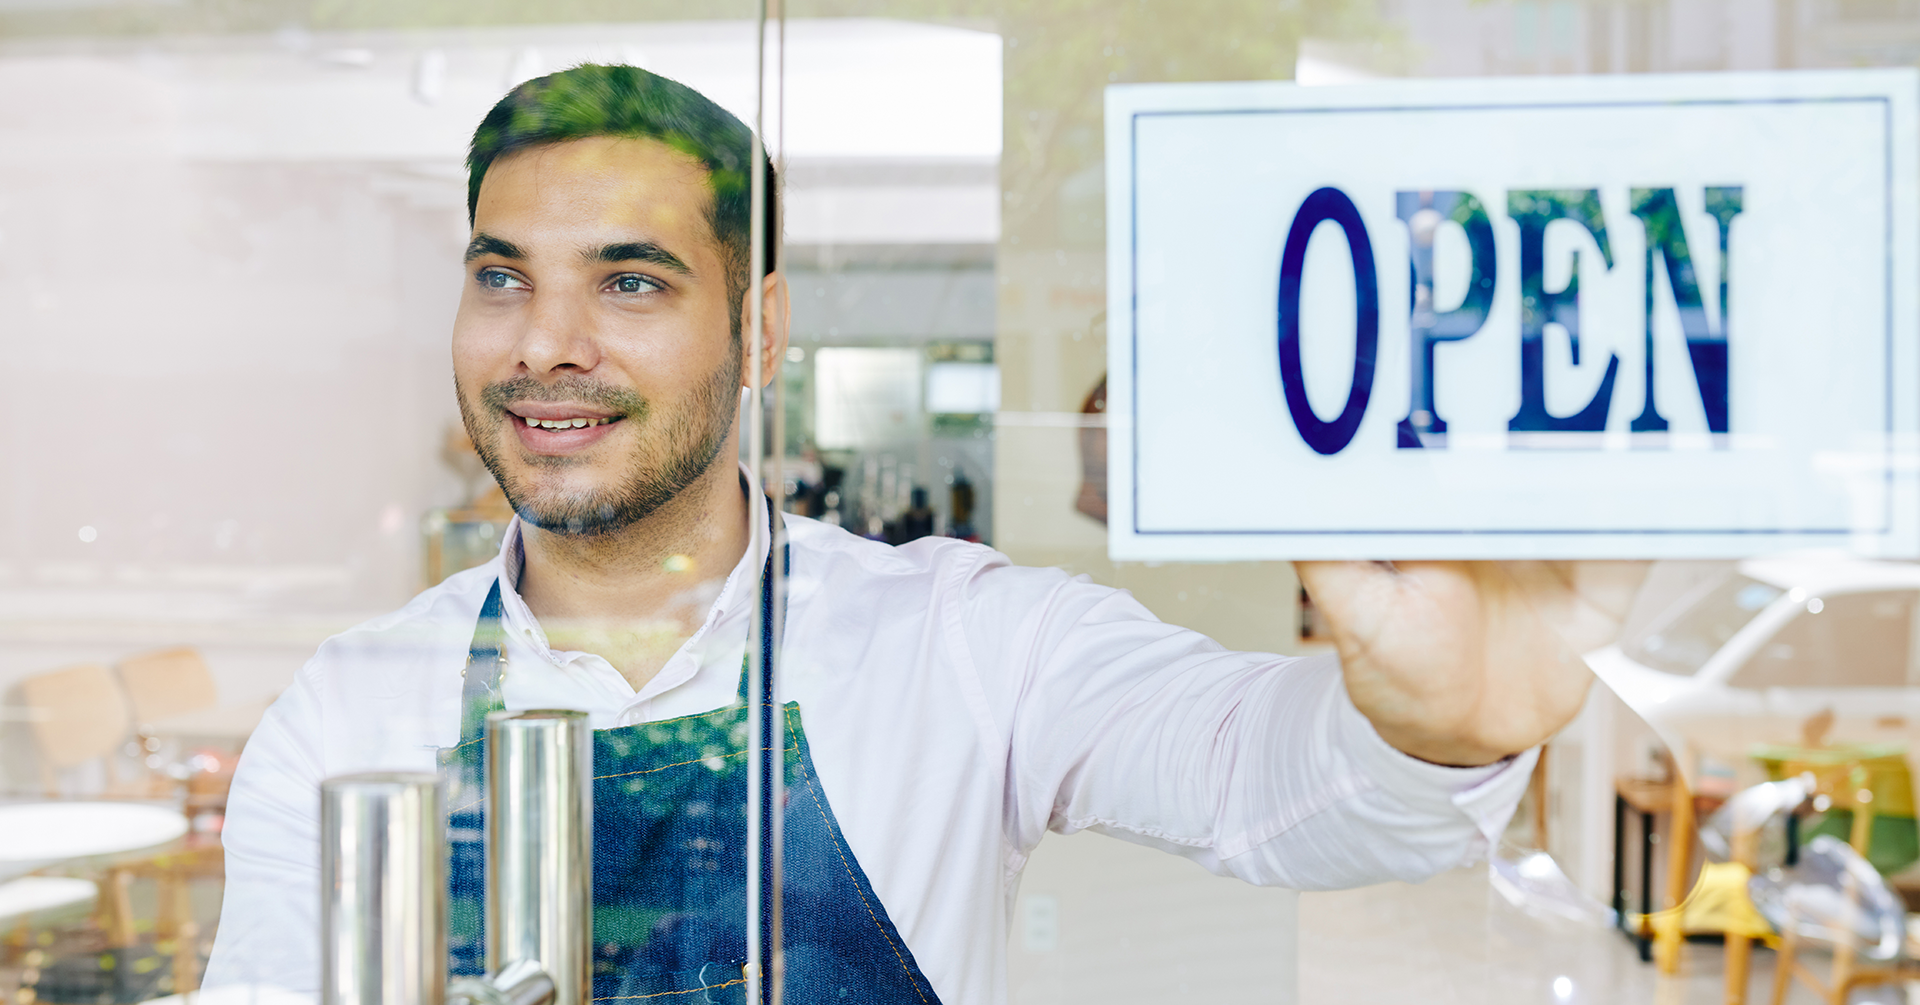 Man wearing an apron looking through the window while touching the Open sign.